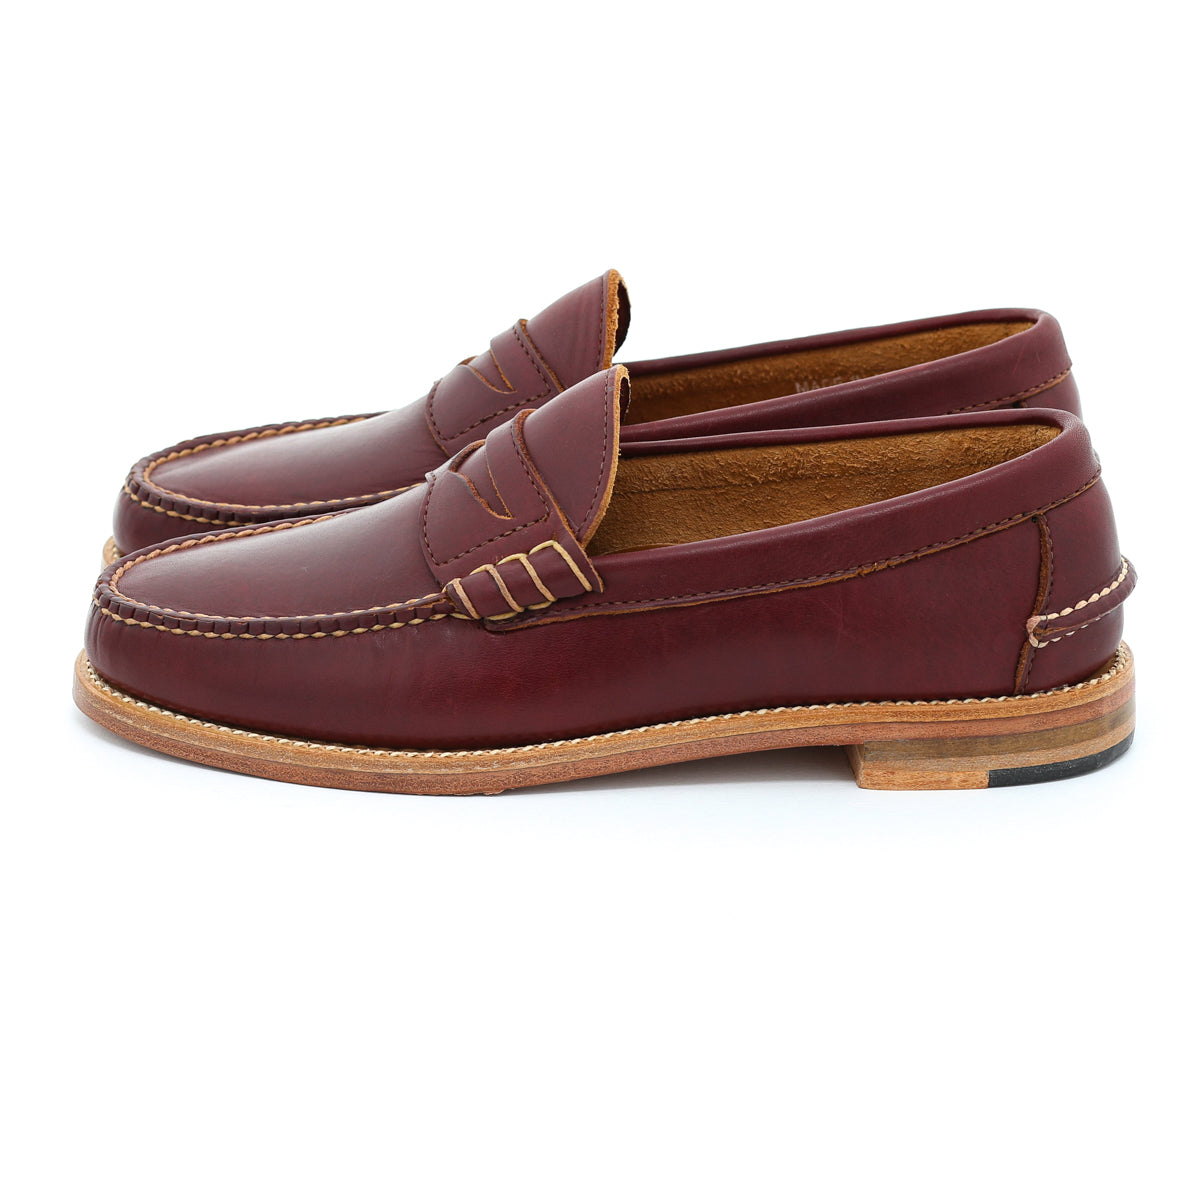 Beefroll Penny Loafers - Burgundy